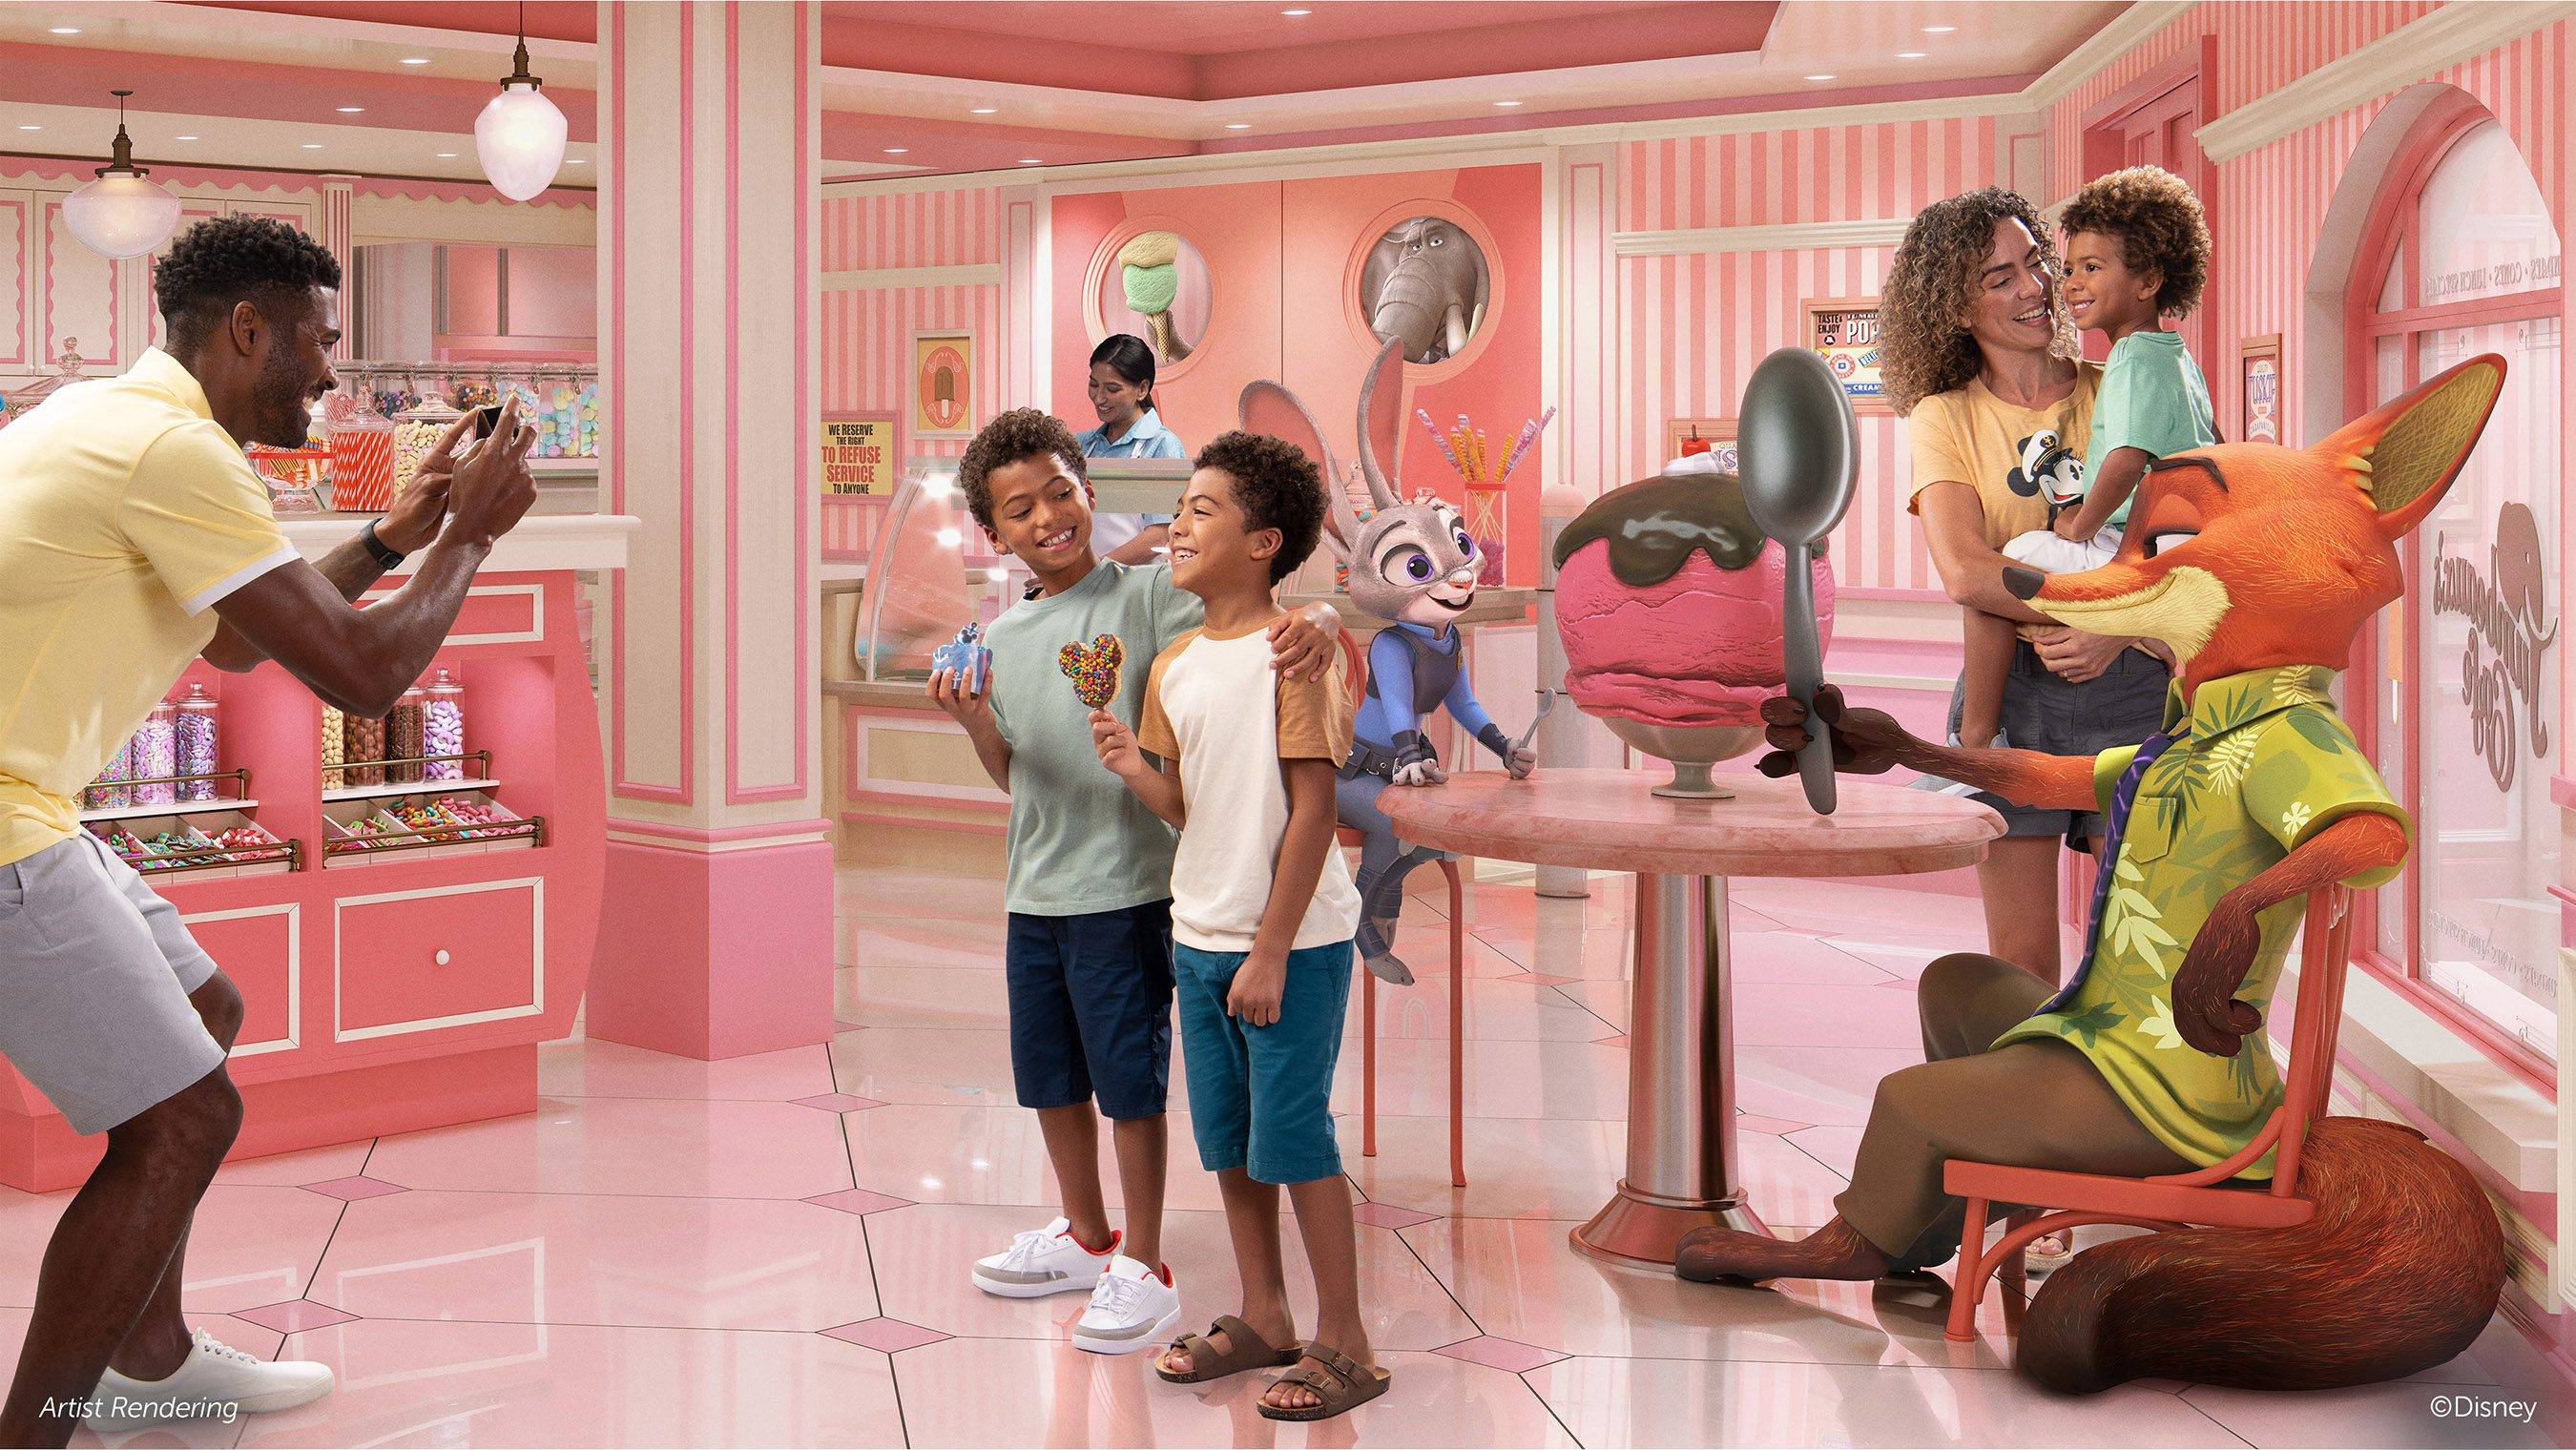 Jumbeaux’s Sweets, will be reminiscent of the popular ice cream parlor, Jumbeaux Café, from the bustling mammal metropolis featured in Disney’s “Zootopia.” Surrounded by playful pink interiors, Victorian-style architecture and an endearing sculpture of Officer Judy Hopps and Nick Wilde, guests will be served humor and heart by the cone full, along with a selection of more than 35 flavors of handmade gelato, ice cream and sorbets, specialty treats, candies and more. 